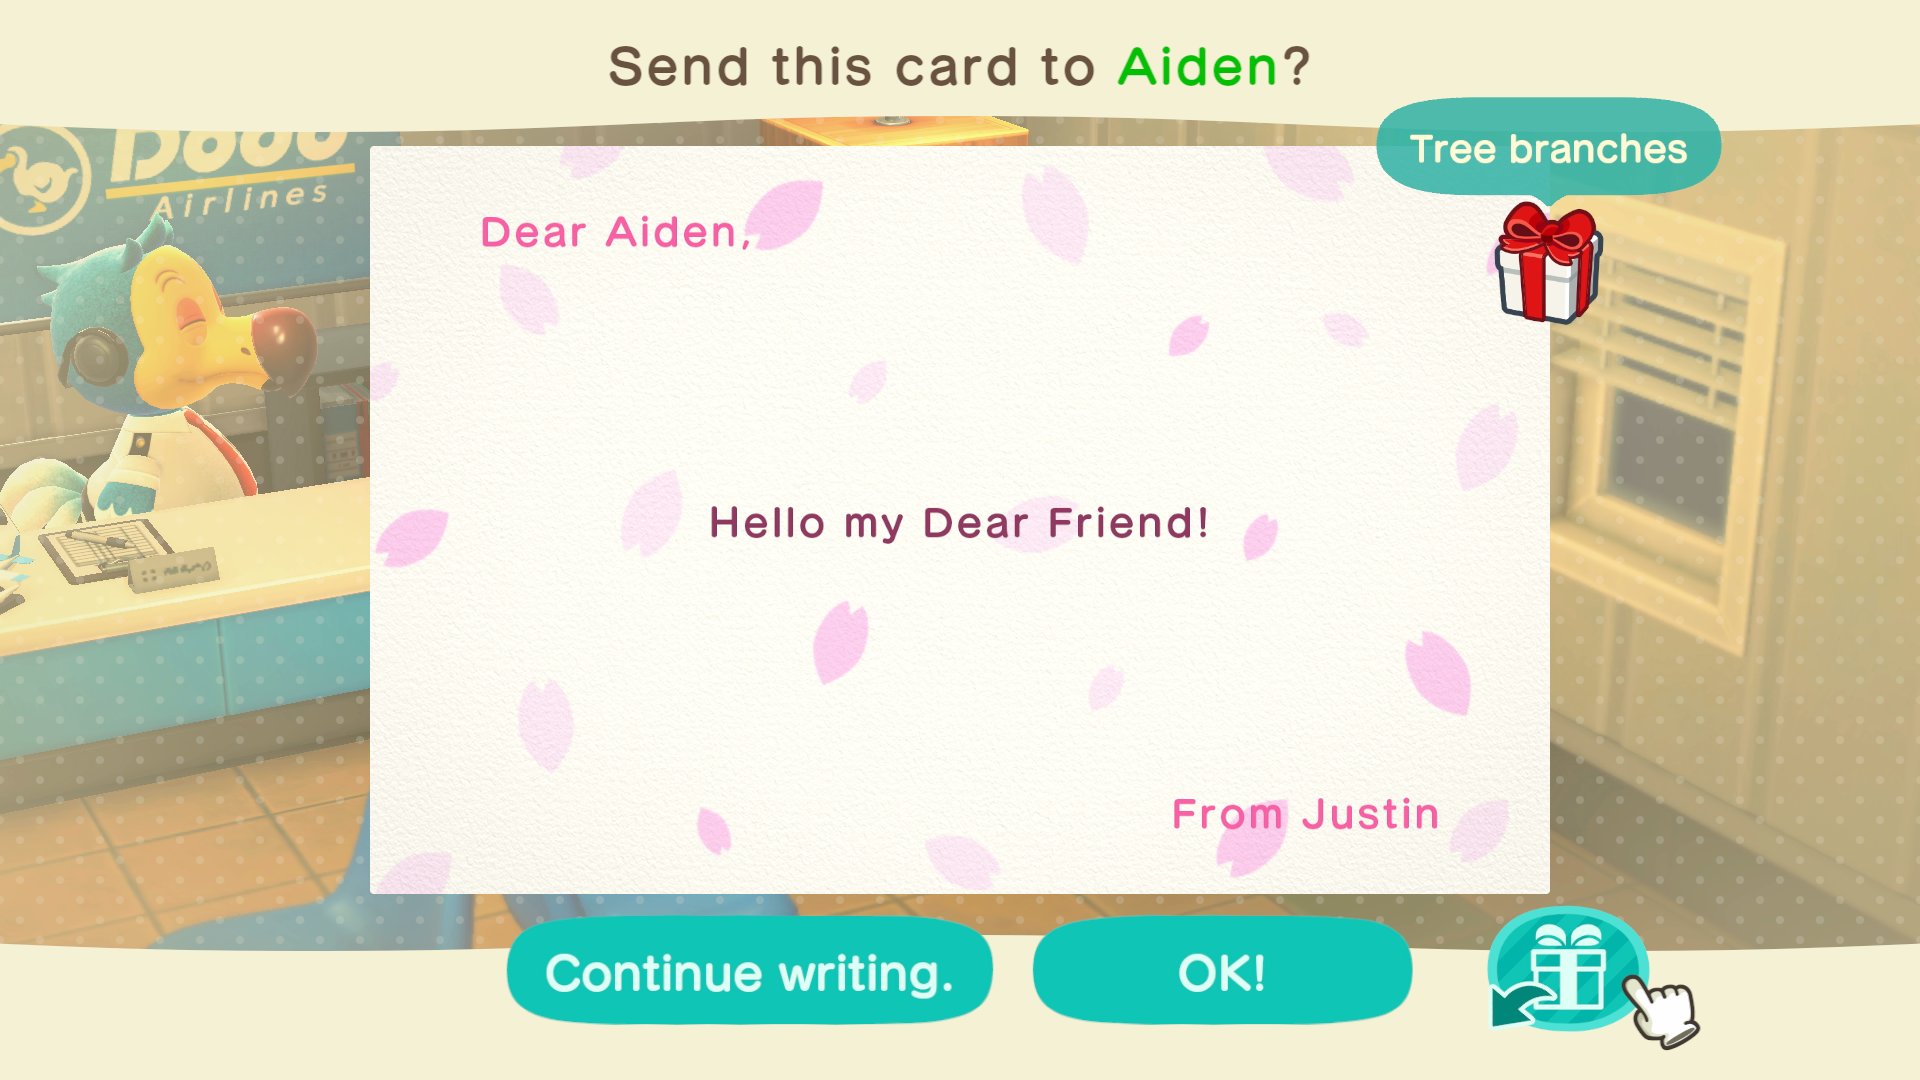 Animal Crossing World 🐦☕ on Twitter: "📬 You can mail letters to